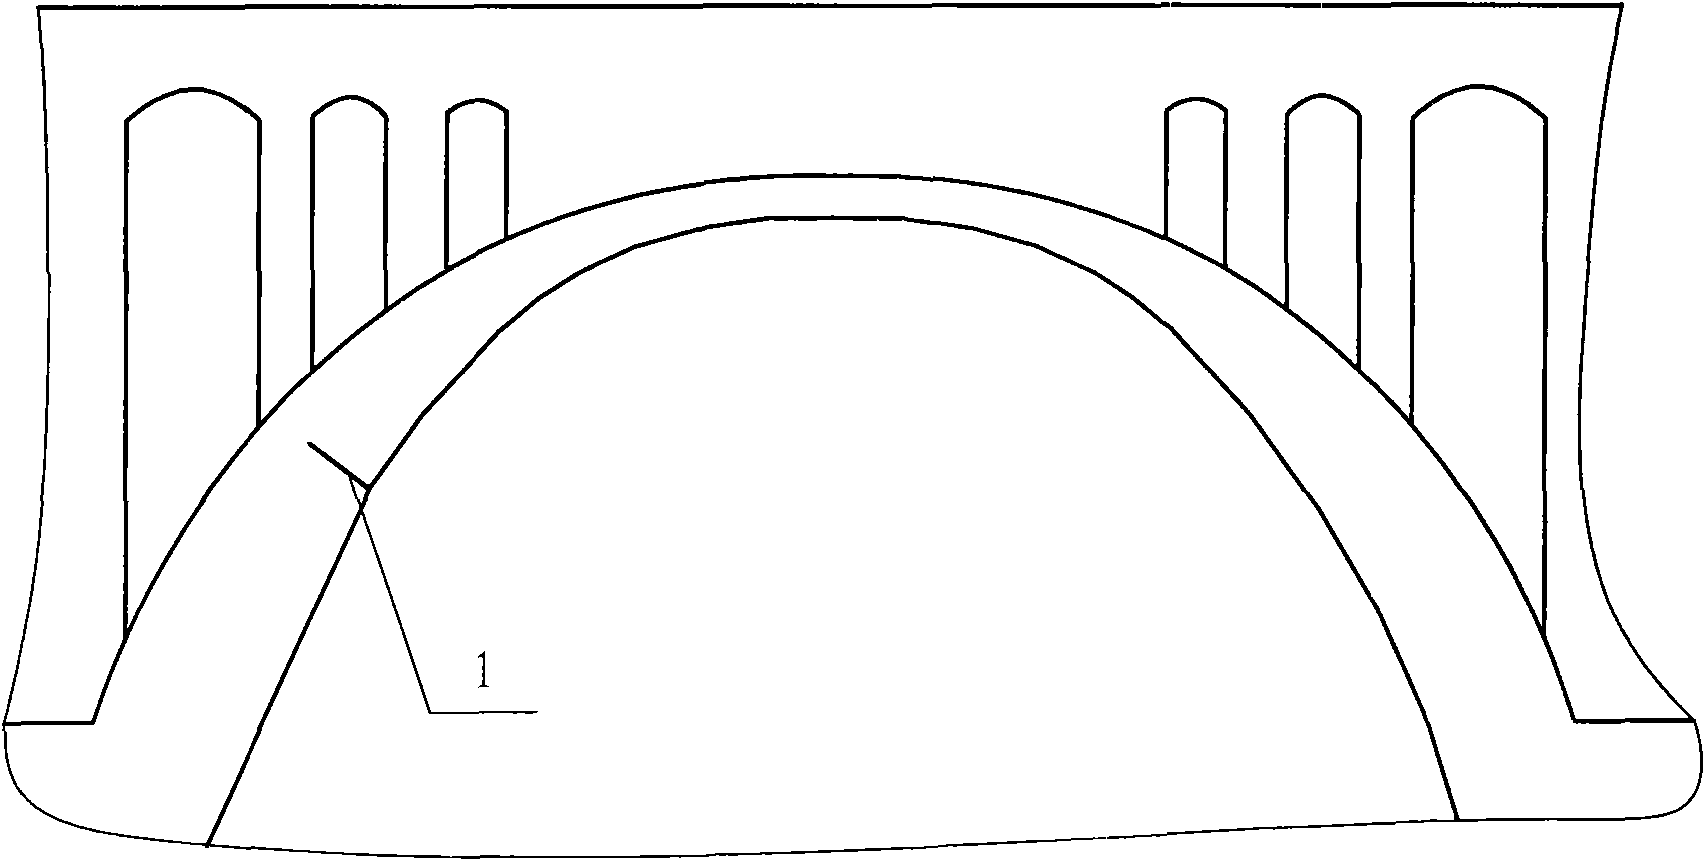 Construction method for strengthening arch foot crack of stone arch bridge